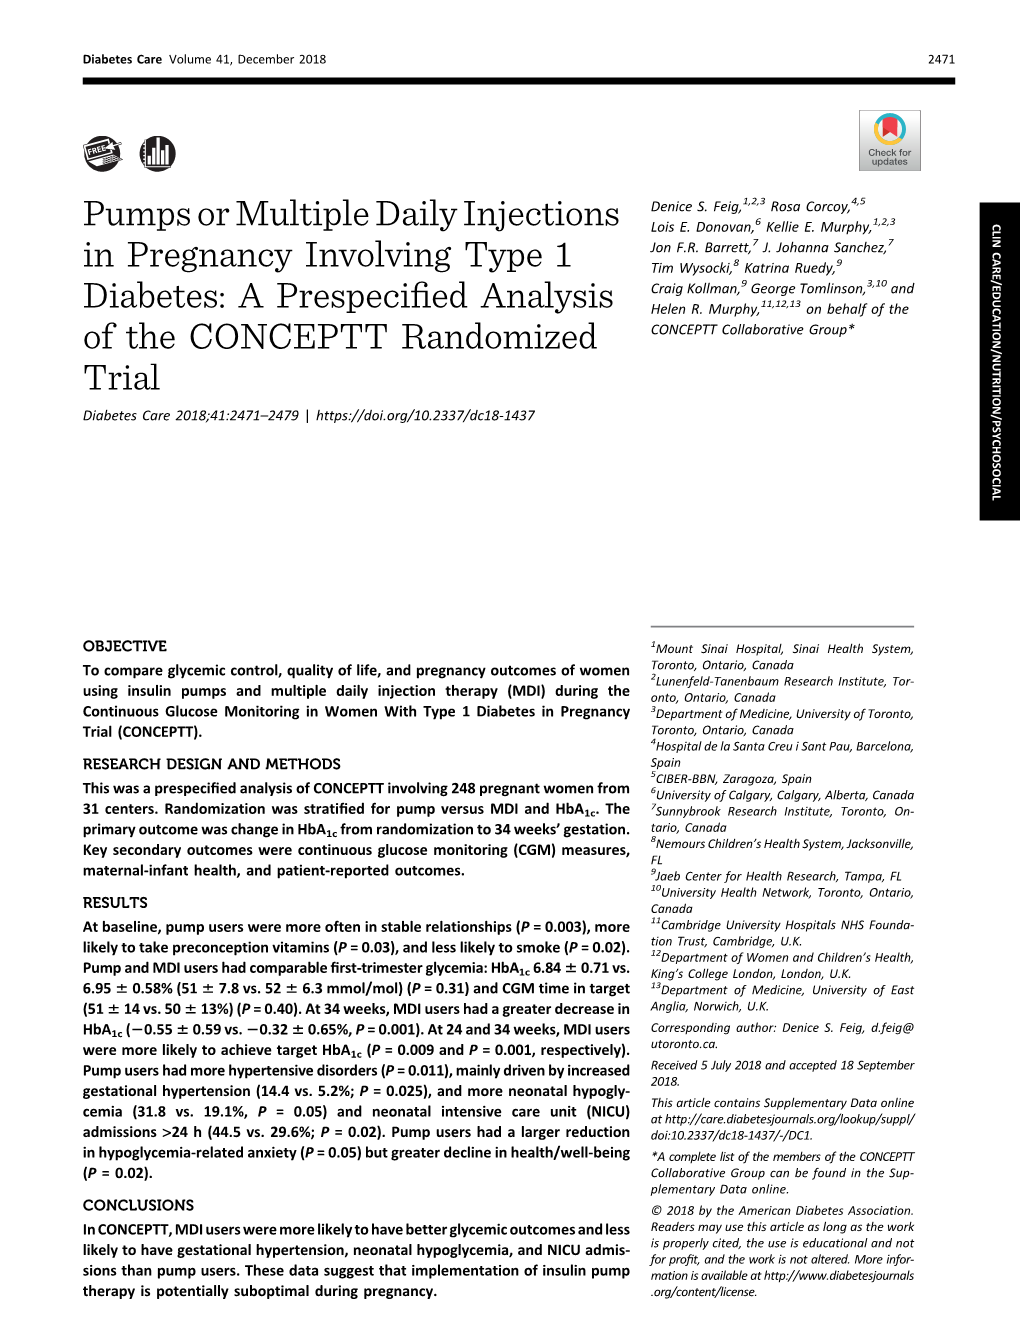 Pumps Or Multiple Daily Injections in Pregnancy Involving Type 1 Diabetes